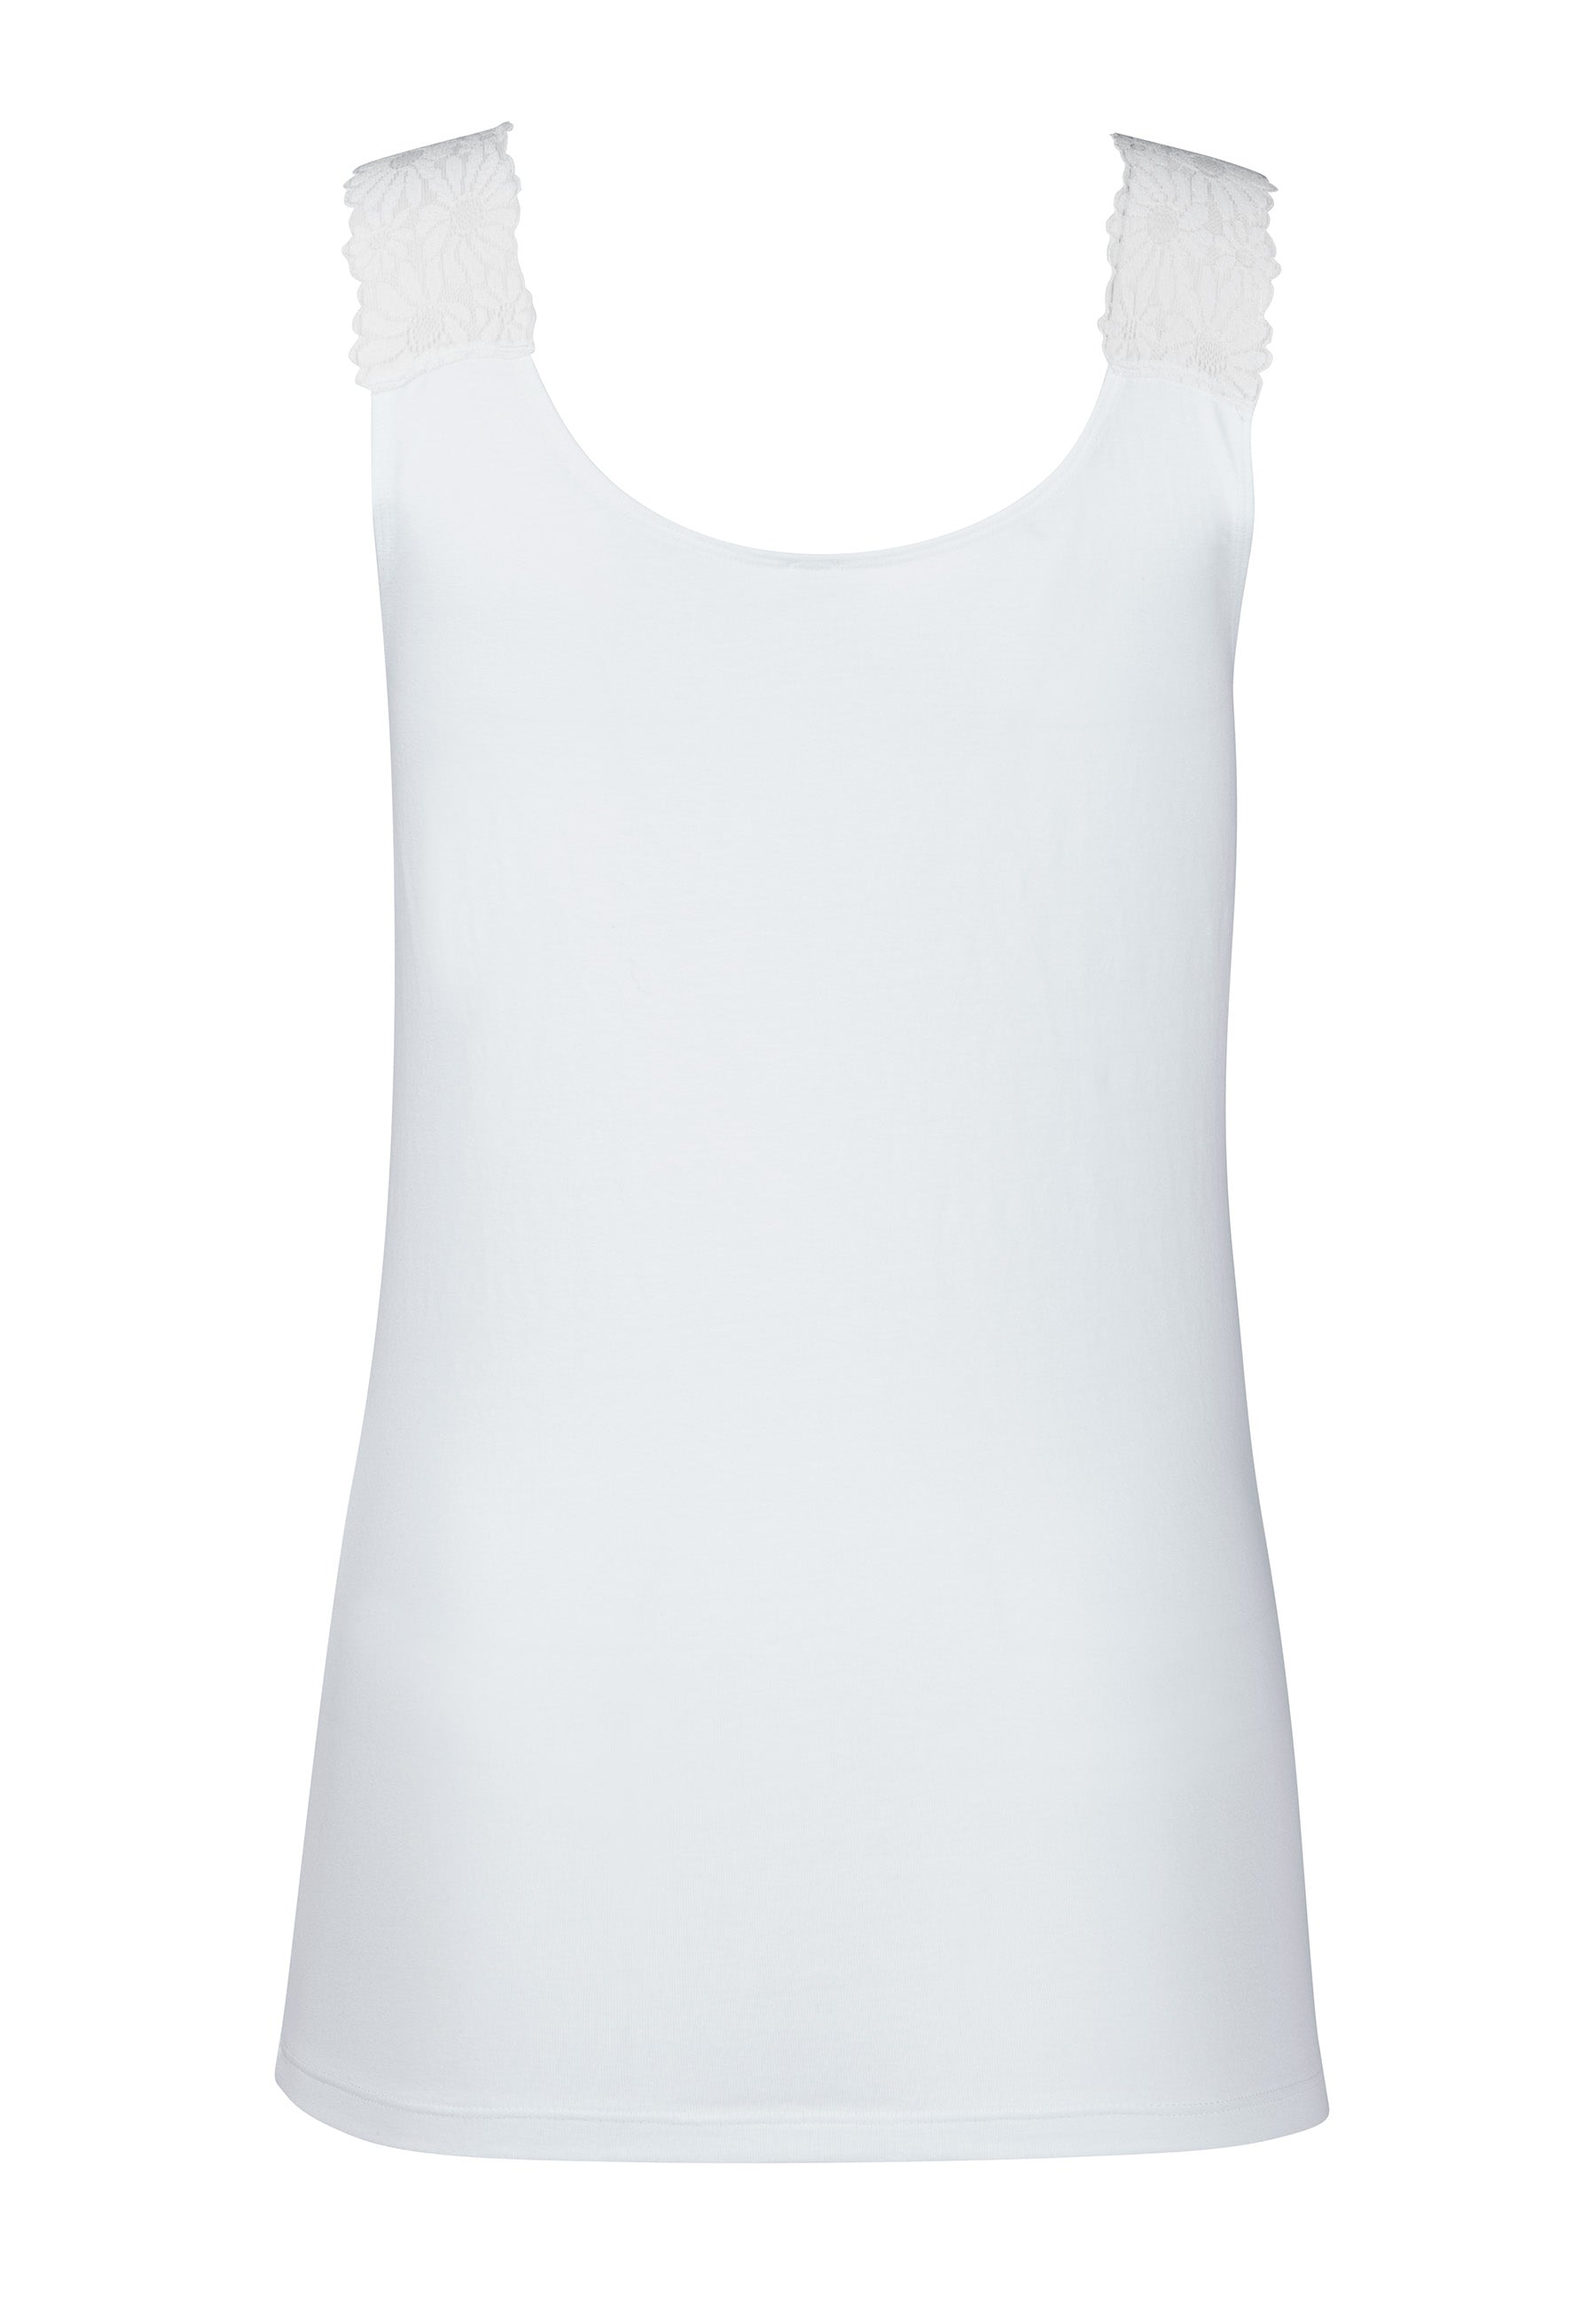 Skiny Every Day In CottonLace Multipack Damen Tank Top (White)